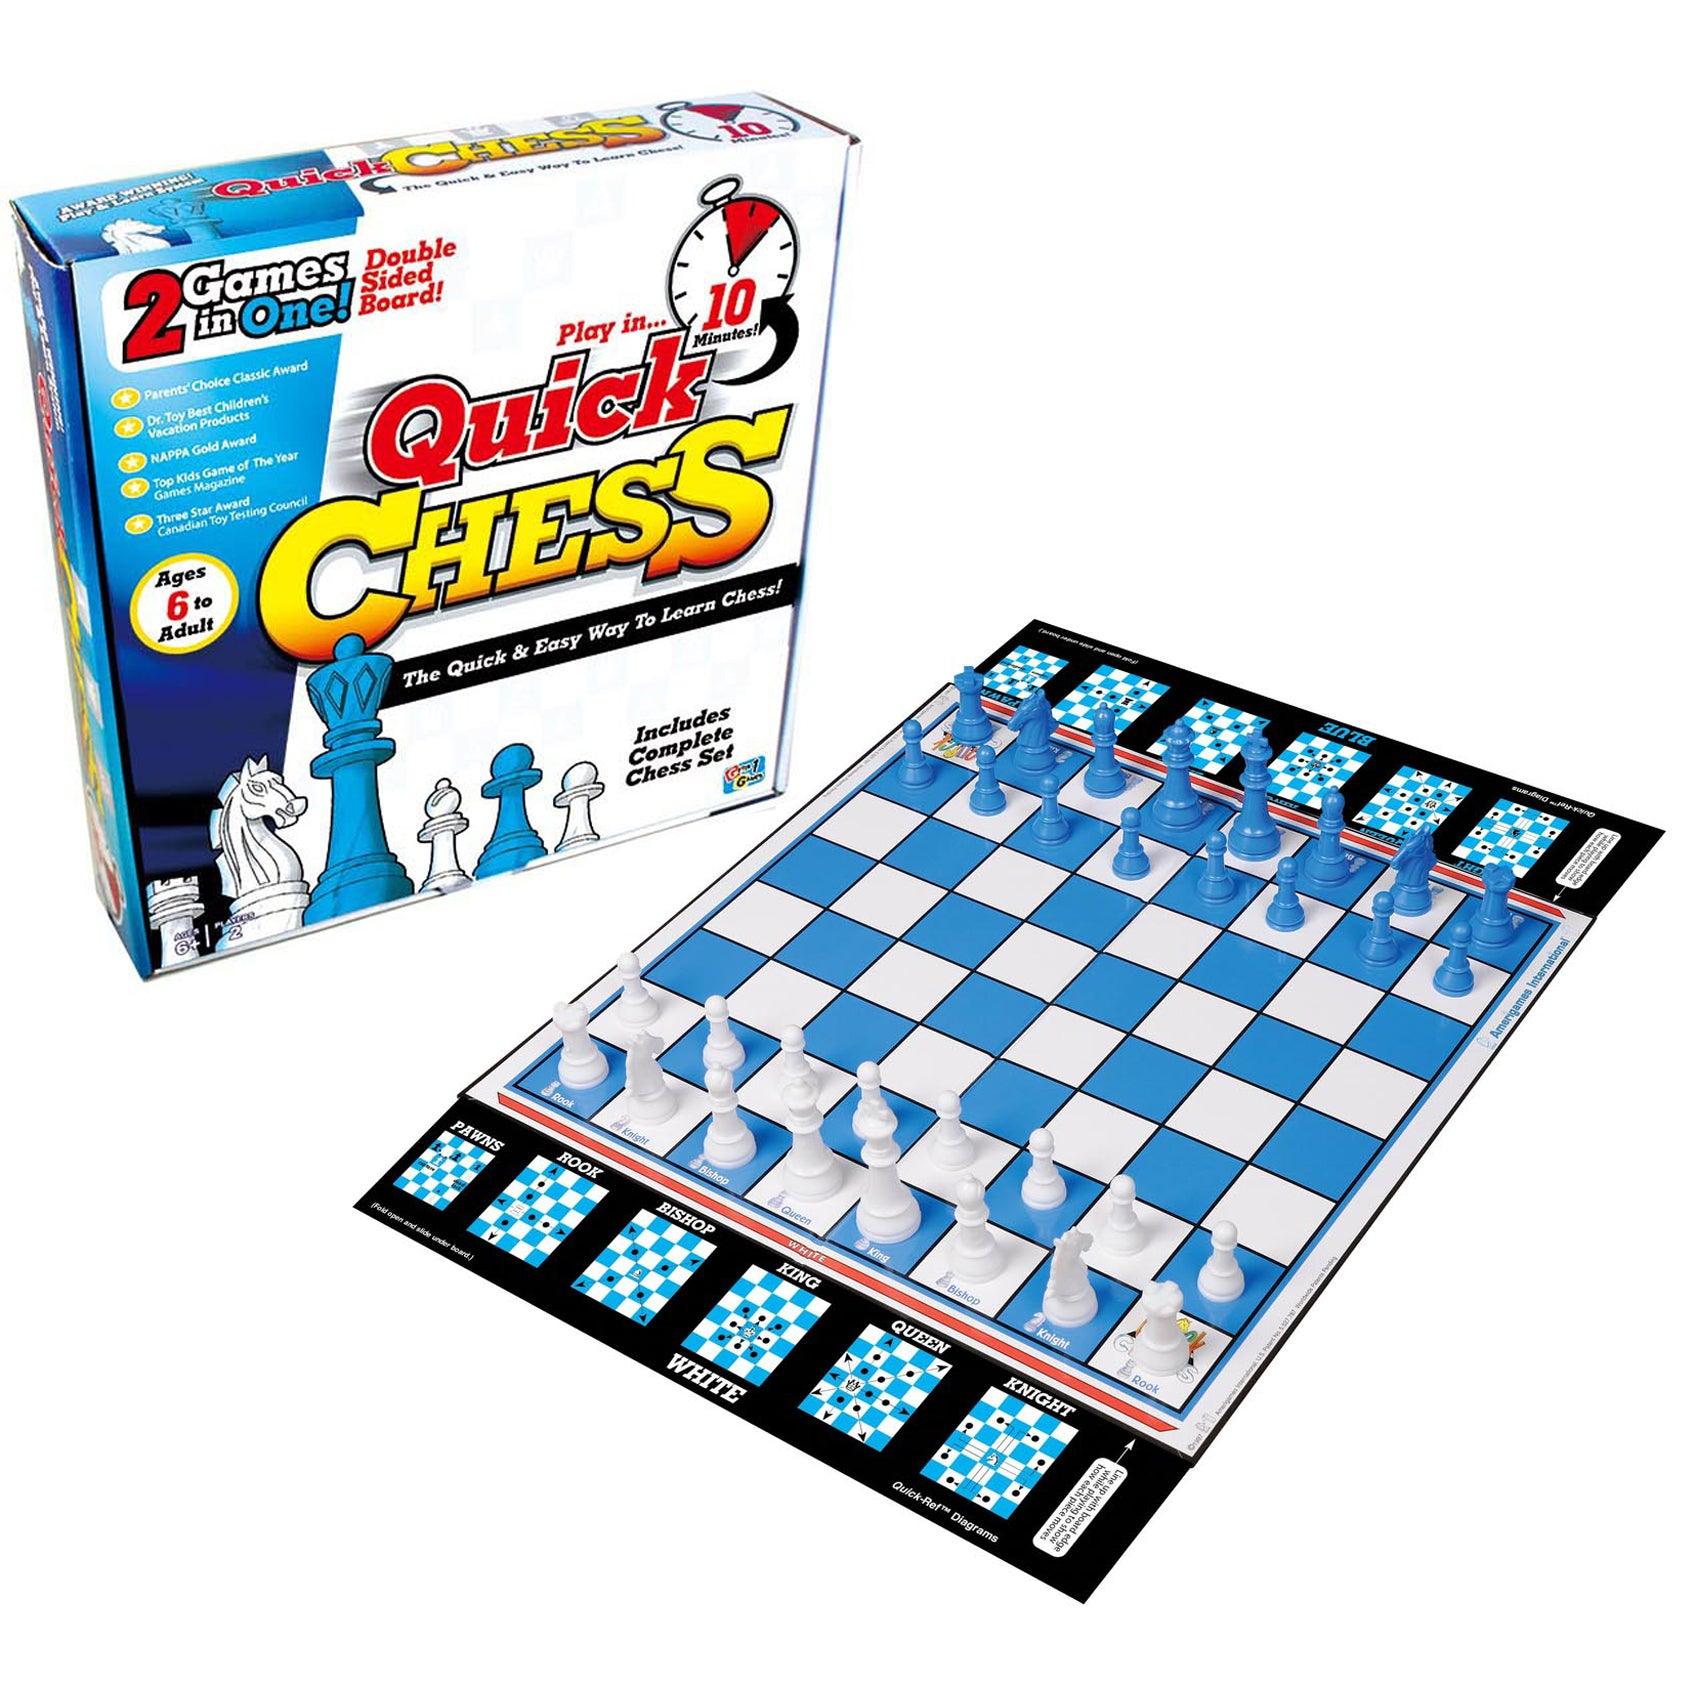 Quick Chess - Learn Chess with 8 Simple Activities - For Ages 6+ - Loomini